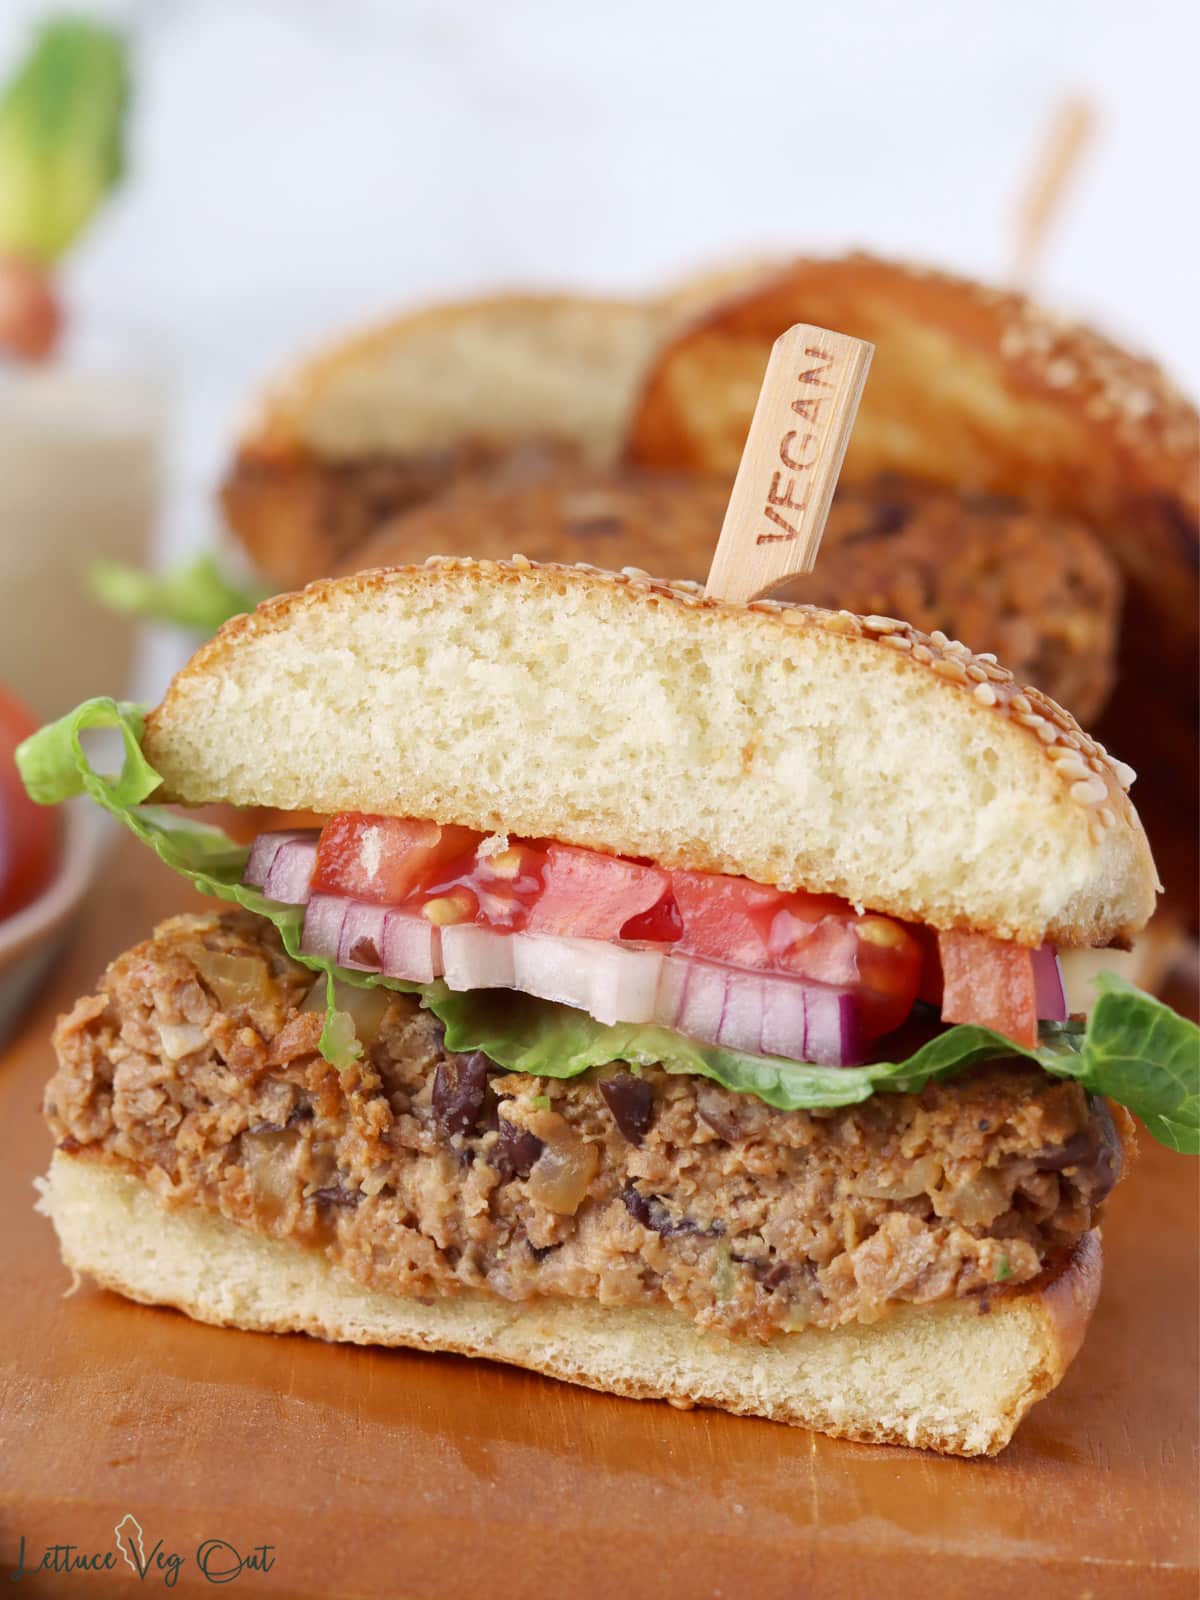 Soy protein burger cut in half to show inside, prepared on a sesame bun with tomato, lettuce and red onion.